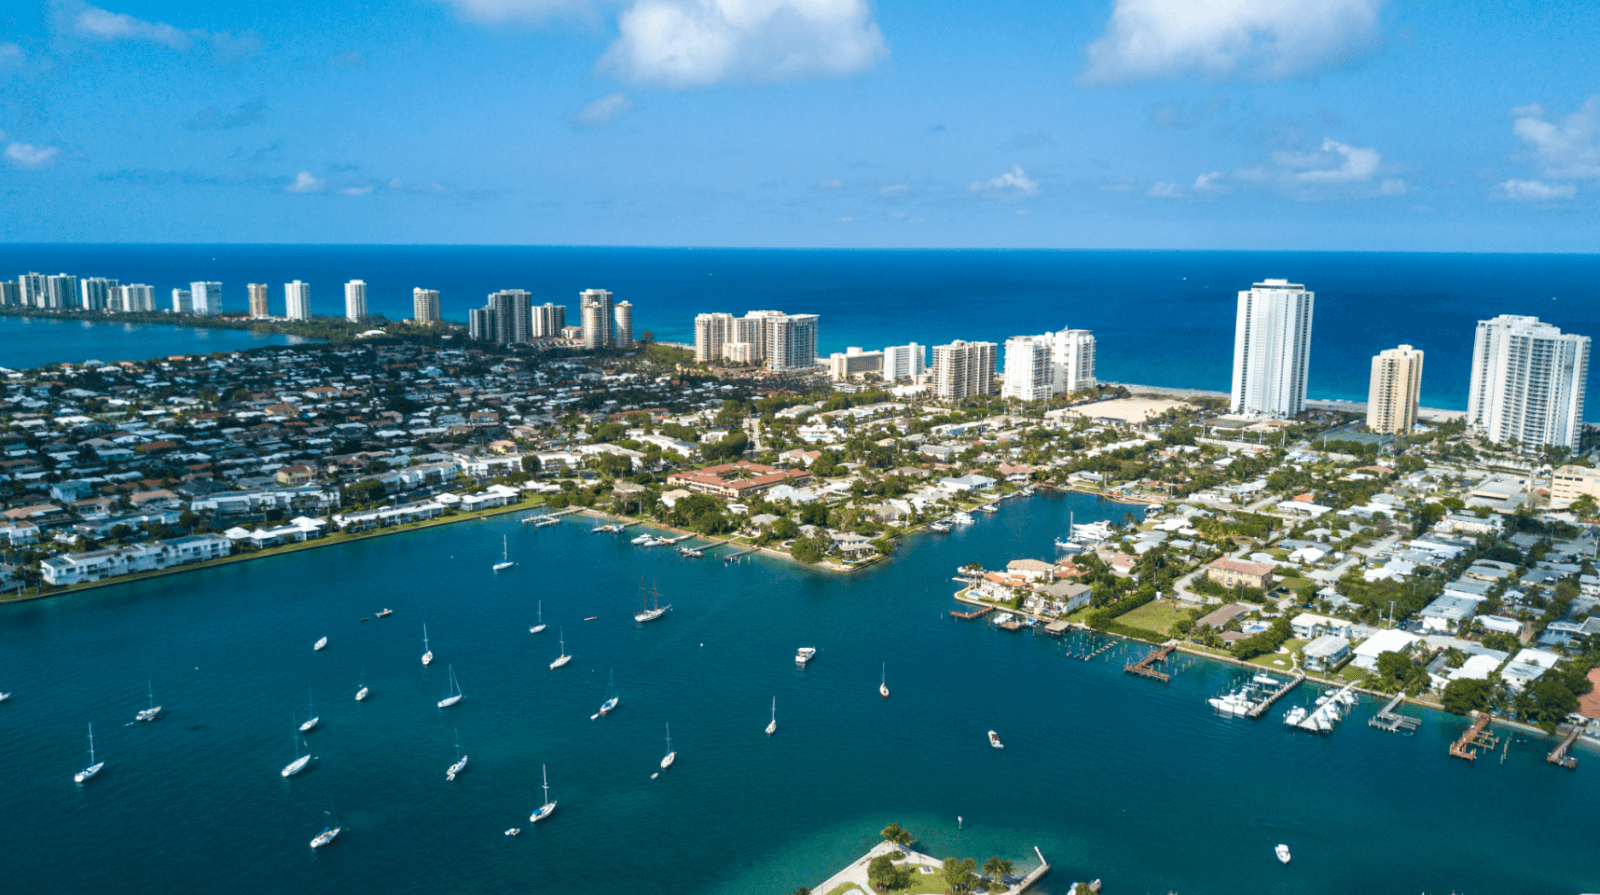 10 Things to Do in Riviera Beach and Singer Island